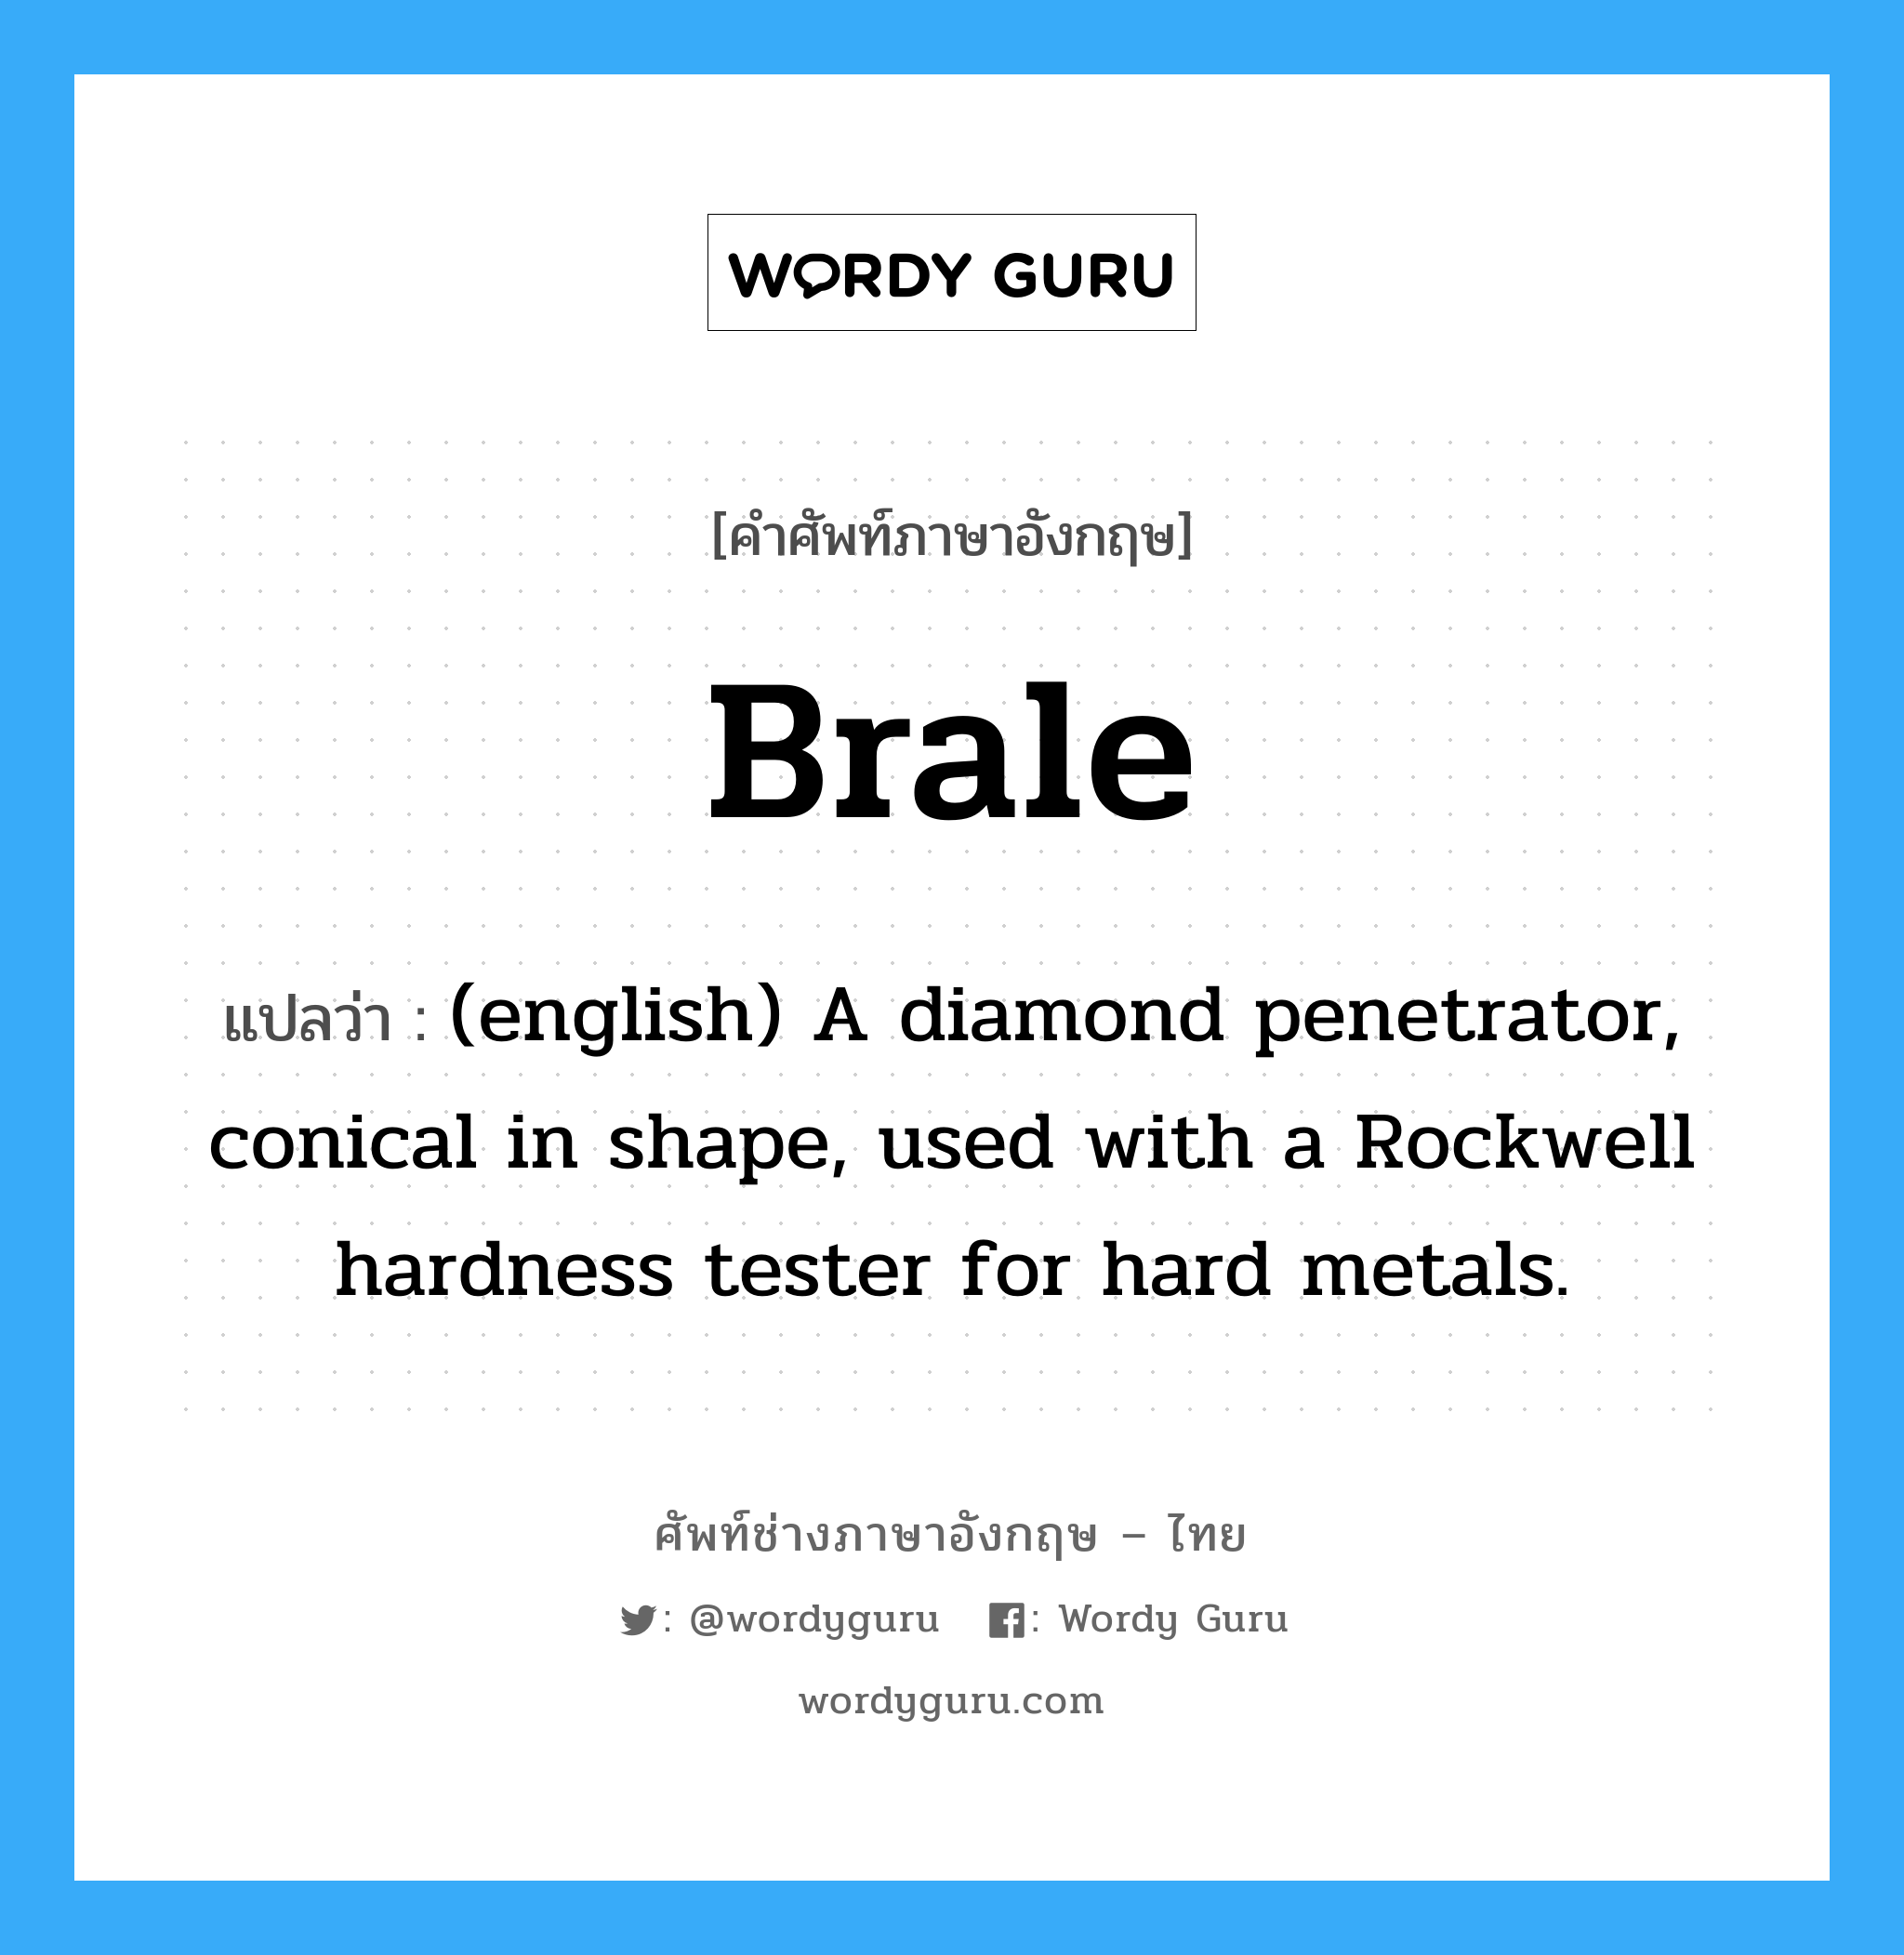 Brale แปลว่า?, คำศัพท์ช่างภาษาอังกฤษ - ไทย Brale คำศัพท์ภาษาอังกฤษ Brale แปลว่า (english) A diamond penetrator, conical in shape, used with a Rockwell hardness tester for hard metals.